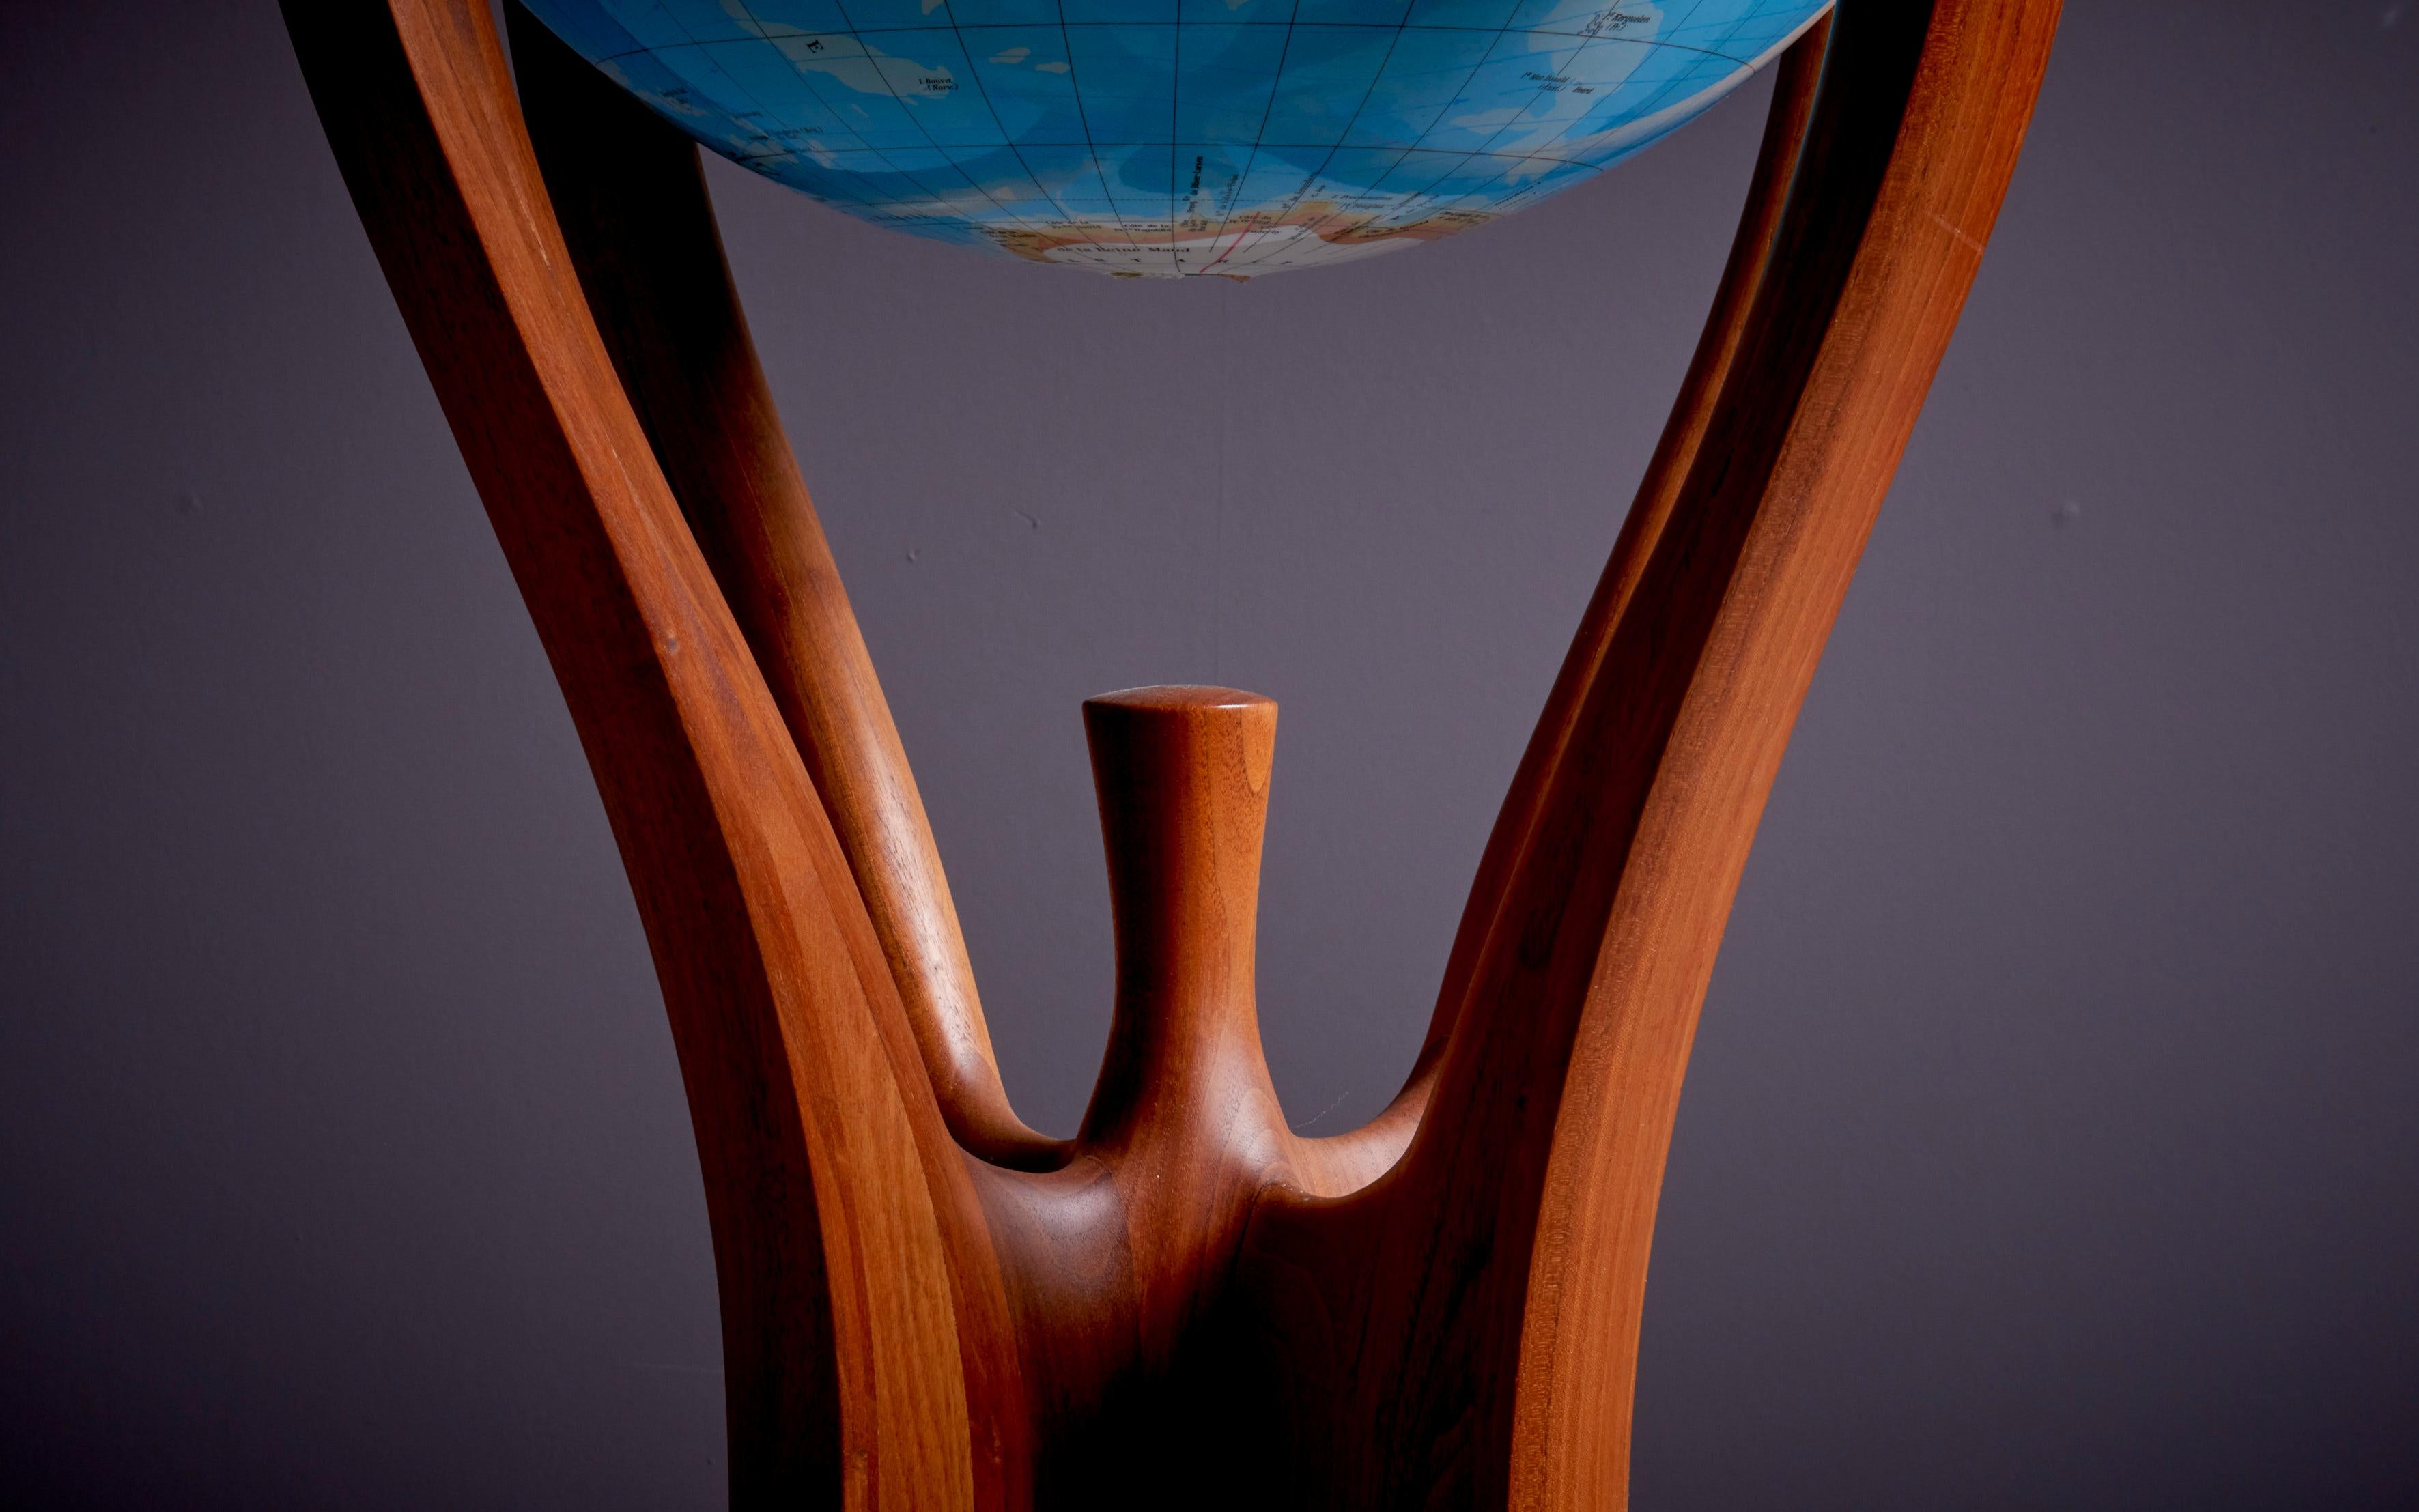 American Craftsman American Studio Globe Stand with Globe by Woodworker Bud Tullis in 1981, Signed For Sale